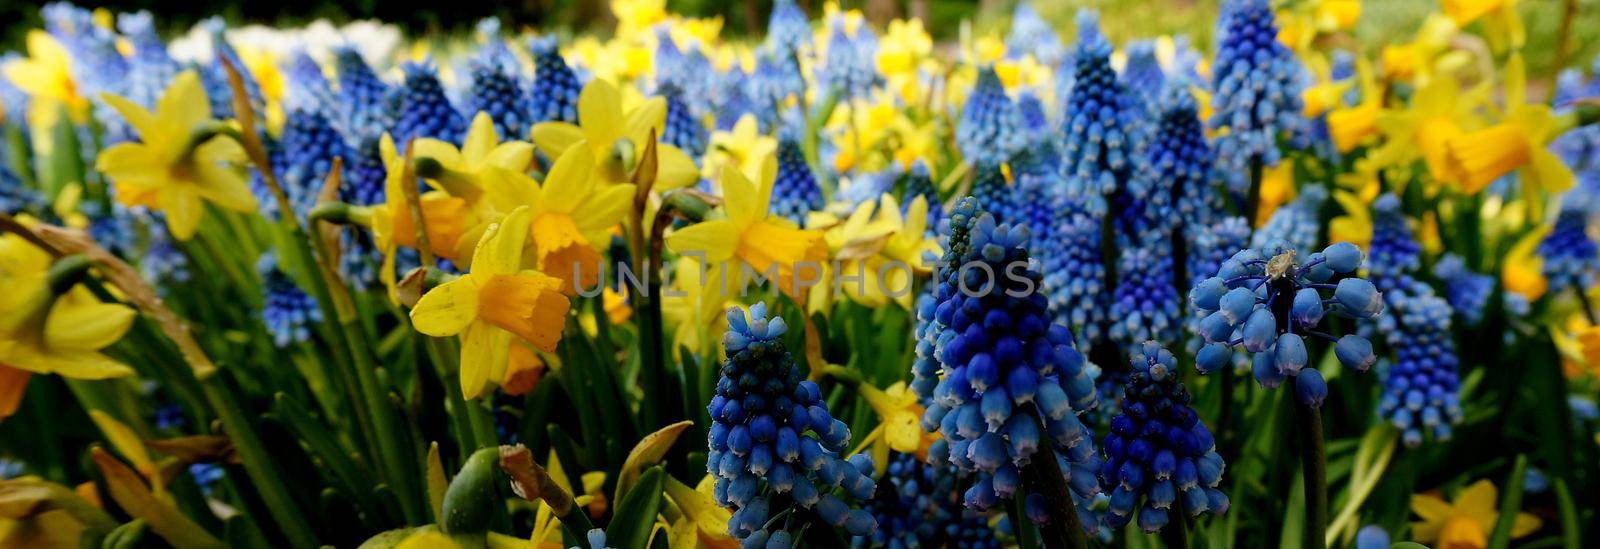 A spring flower background with yellow daffodils and blue grape hyacinths.